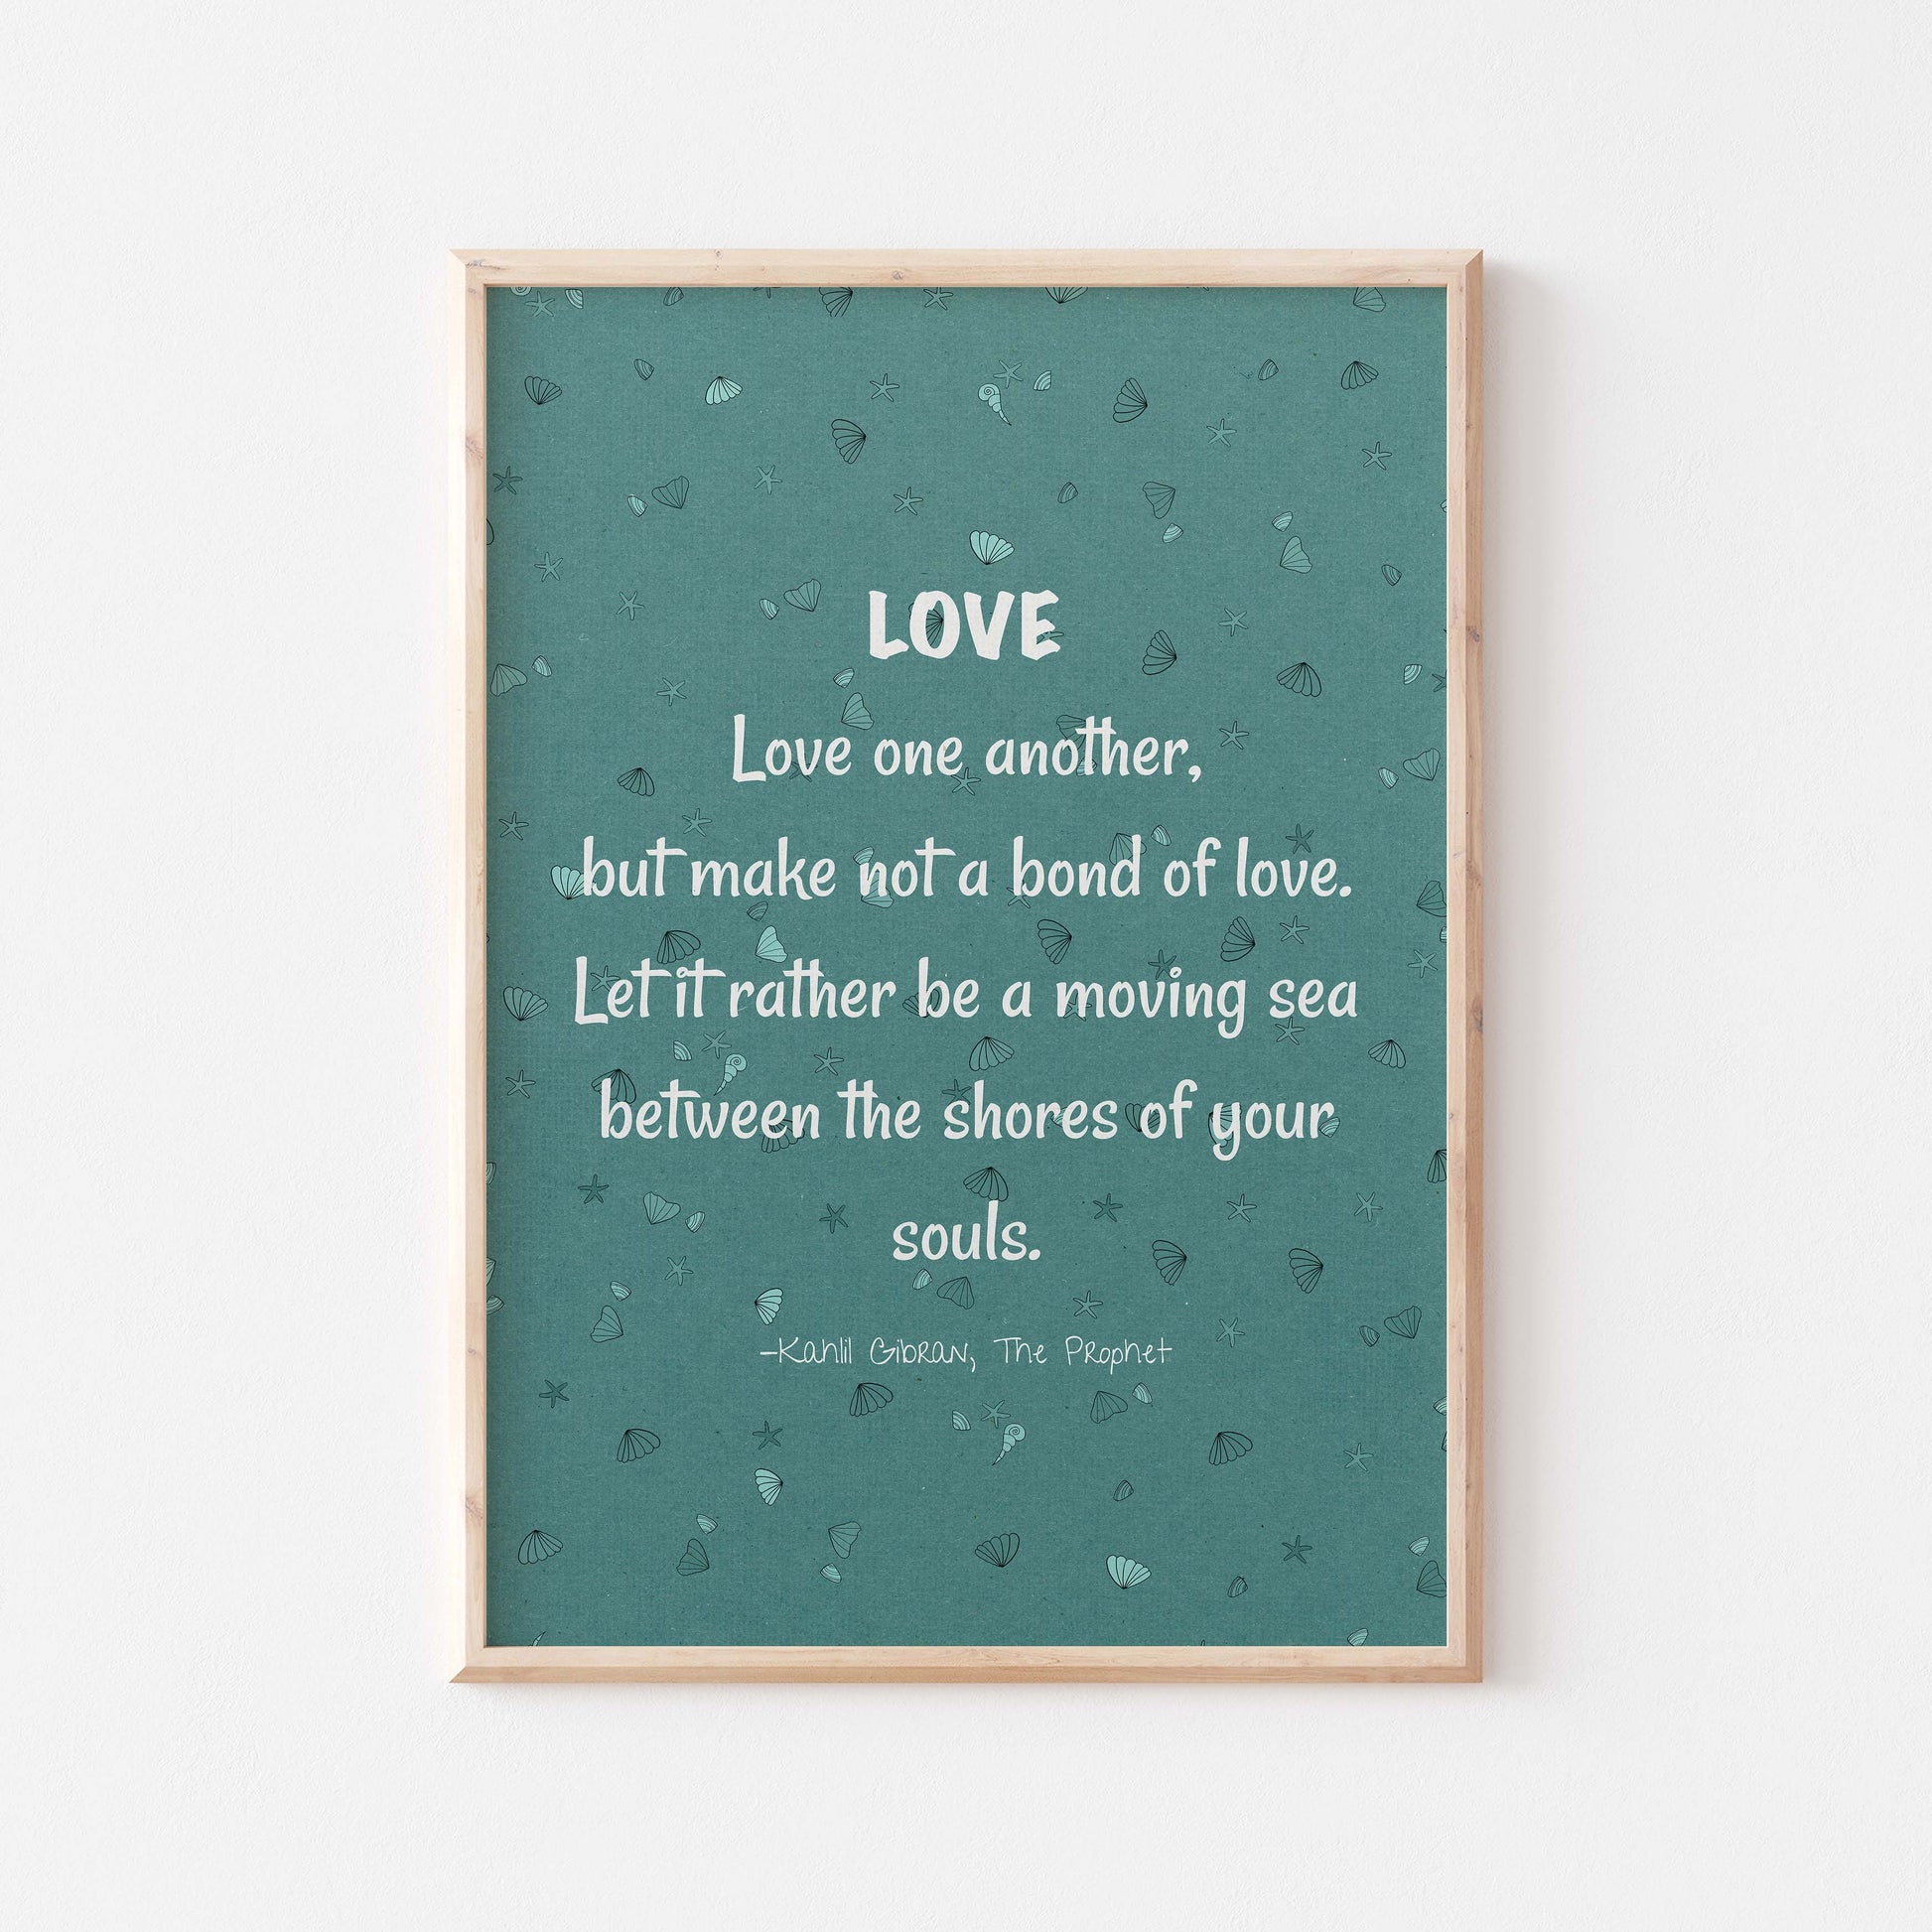 Kahlil Gibran on love quote blue & white poster in wood frame